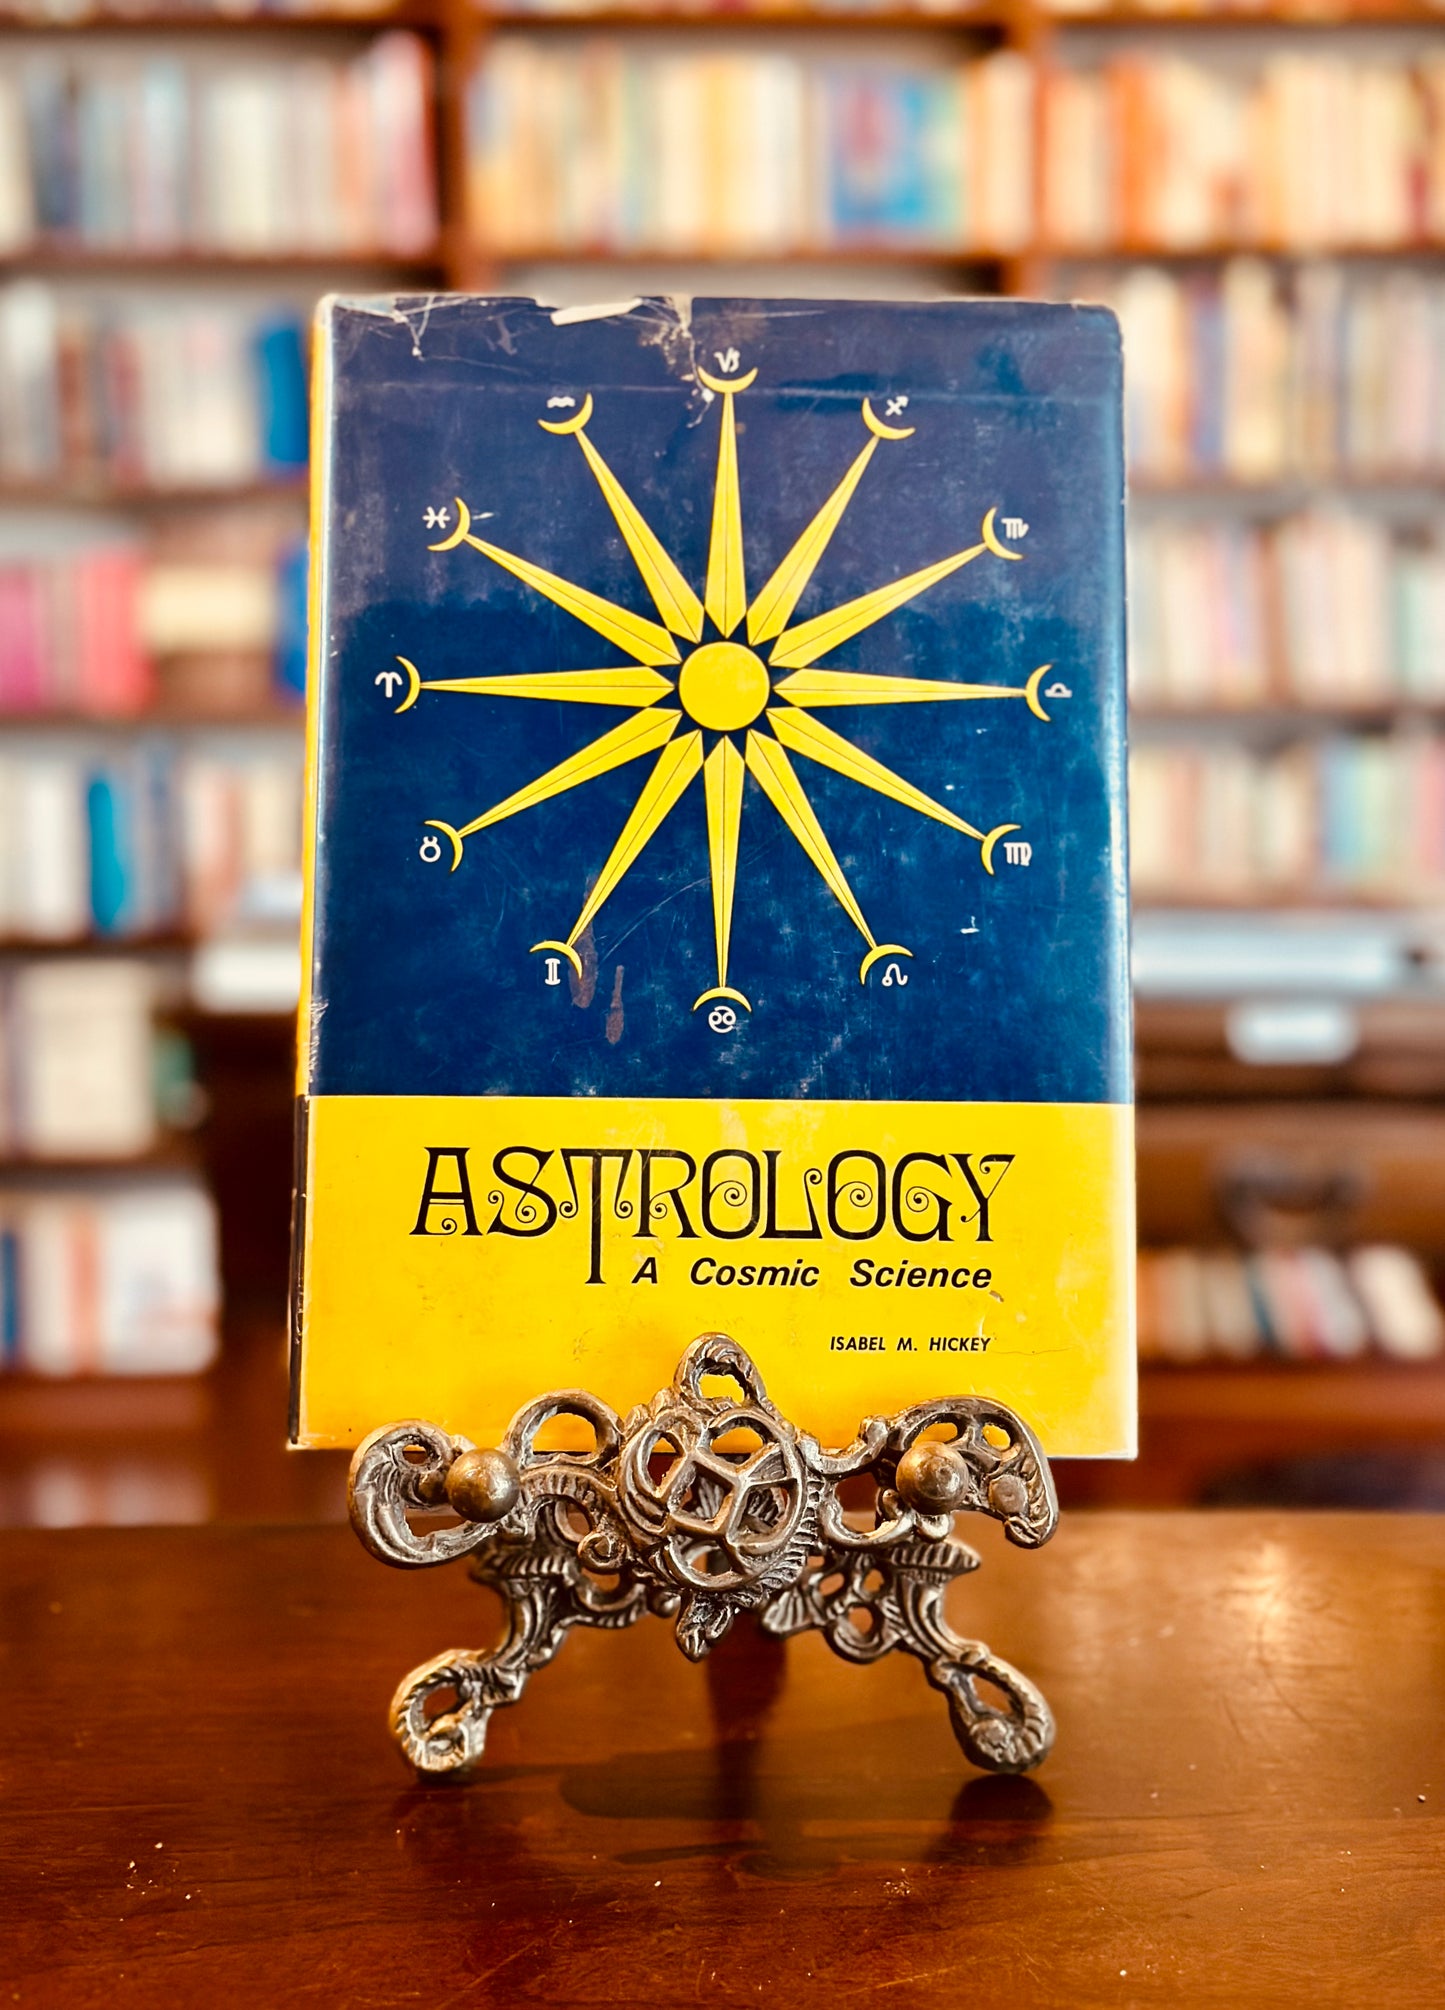 Astrology: A Cosmic Science by Isabel M. Hickey (First Edition)